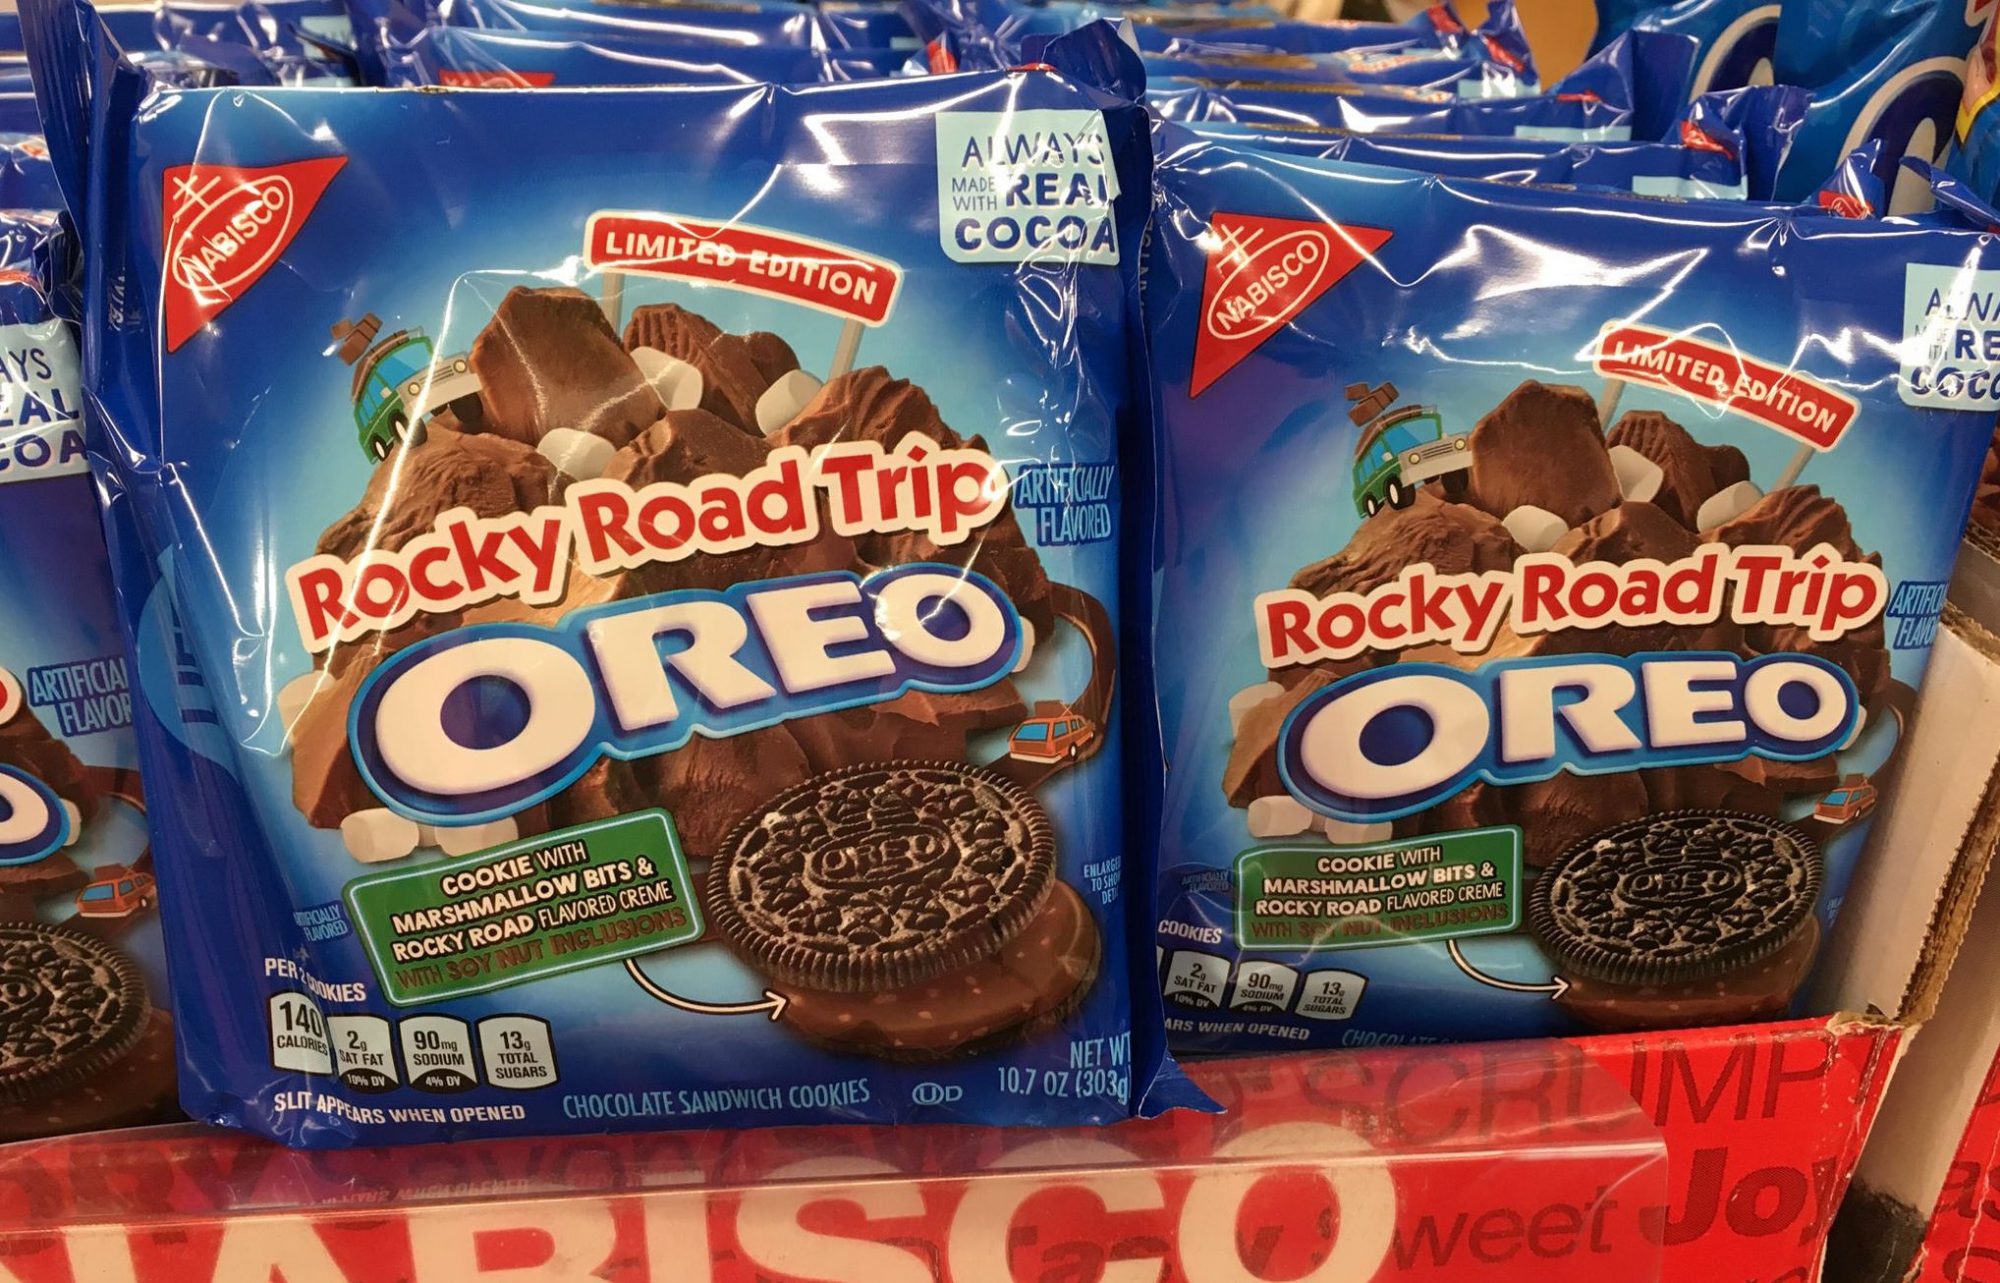 NEW Oreo Flavors Spotted!! Nabisco Oreo Cookies Flavors for 2018